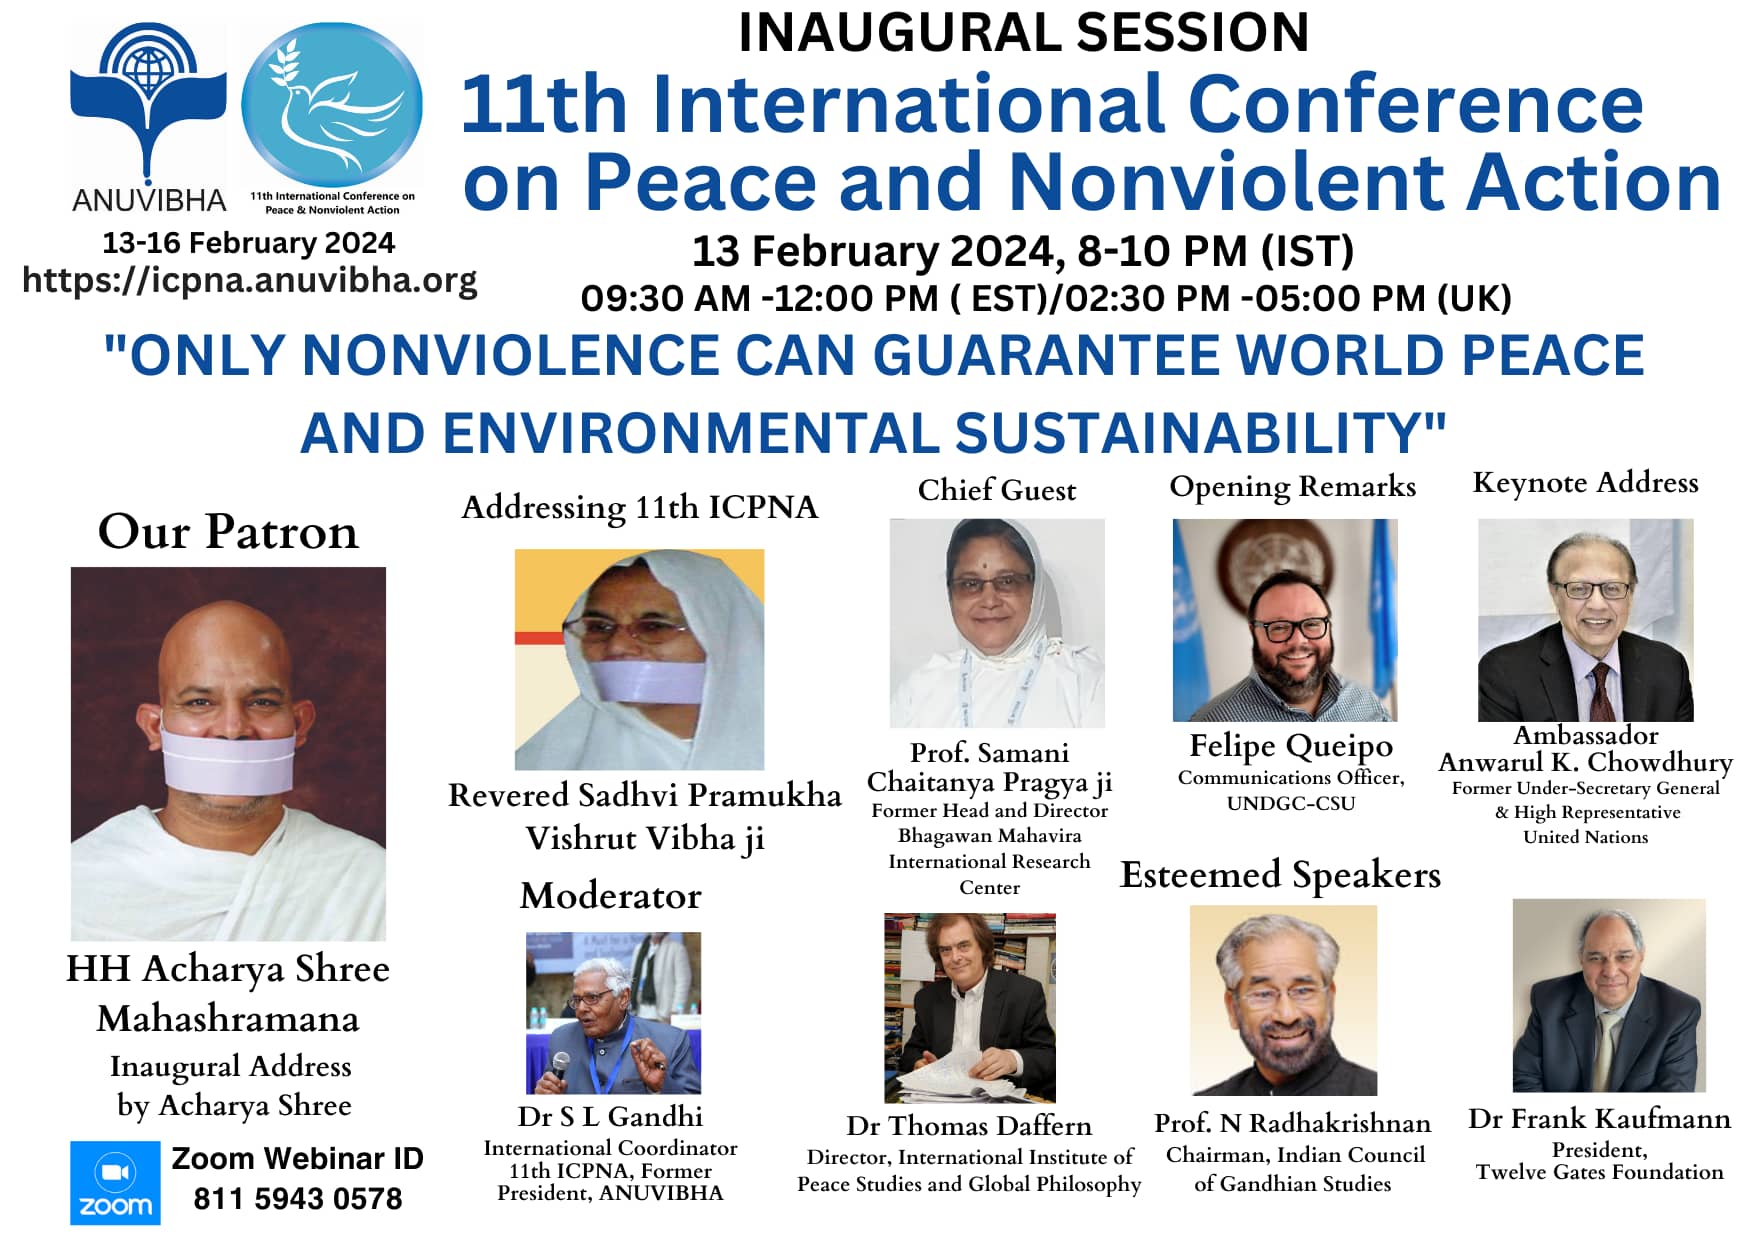 Twelve Gates President Gives Remarks at the 11th International Conference on Peace and Nonviolent Action